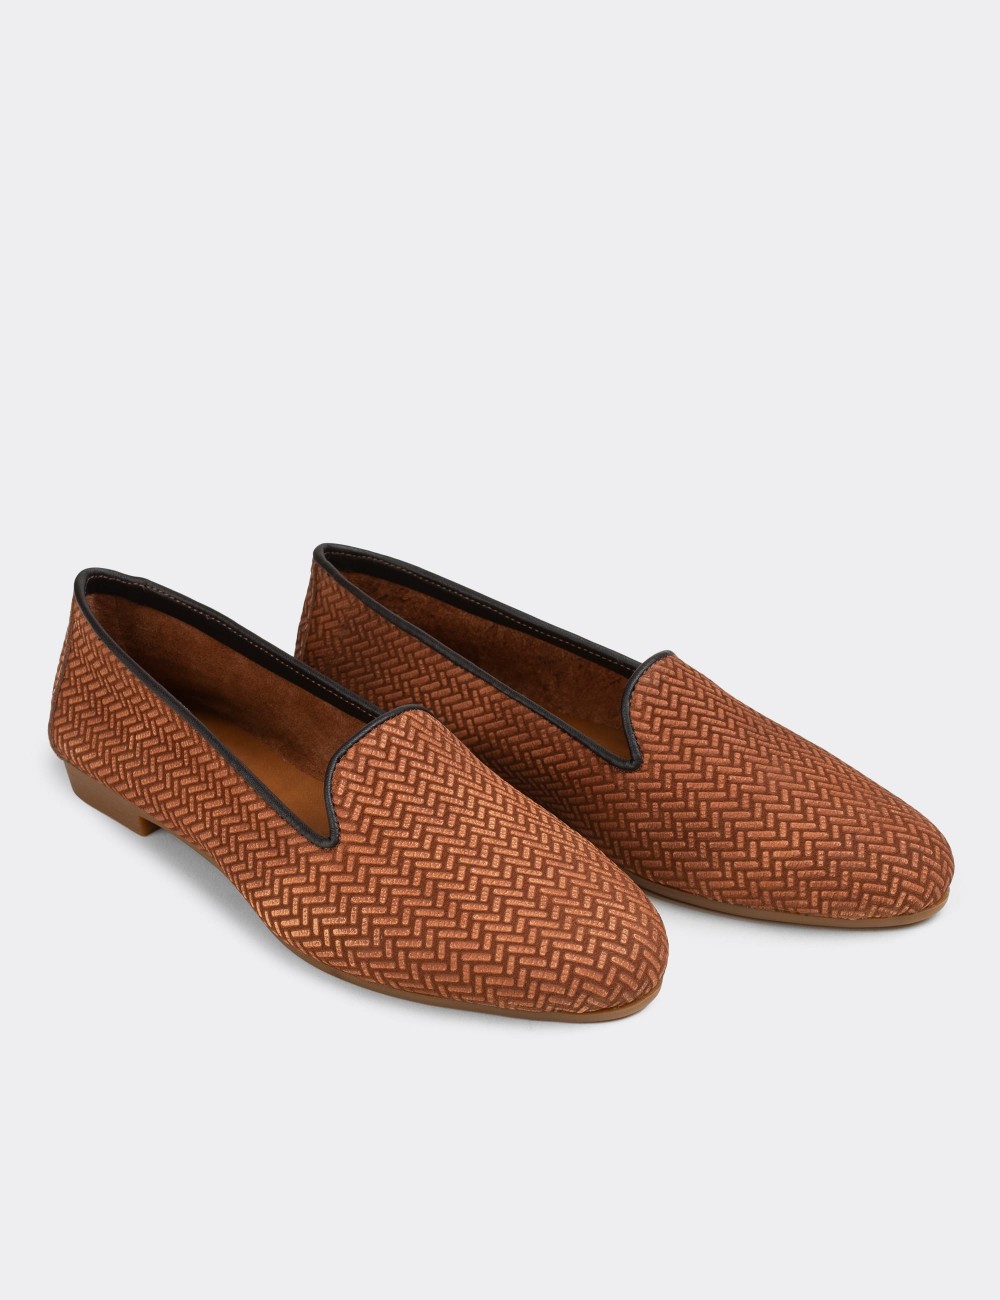 Tan Suede Leather Loafers - E3208ZTBAC02